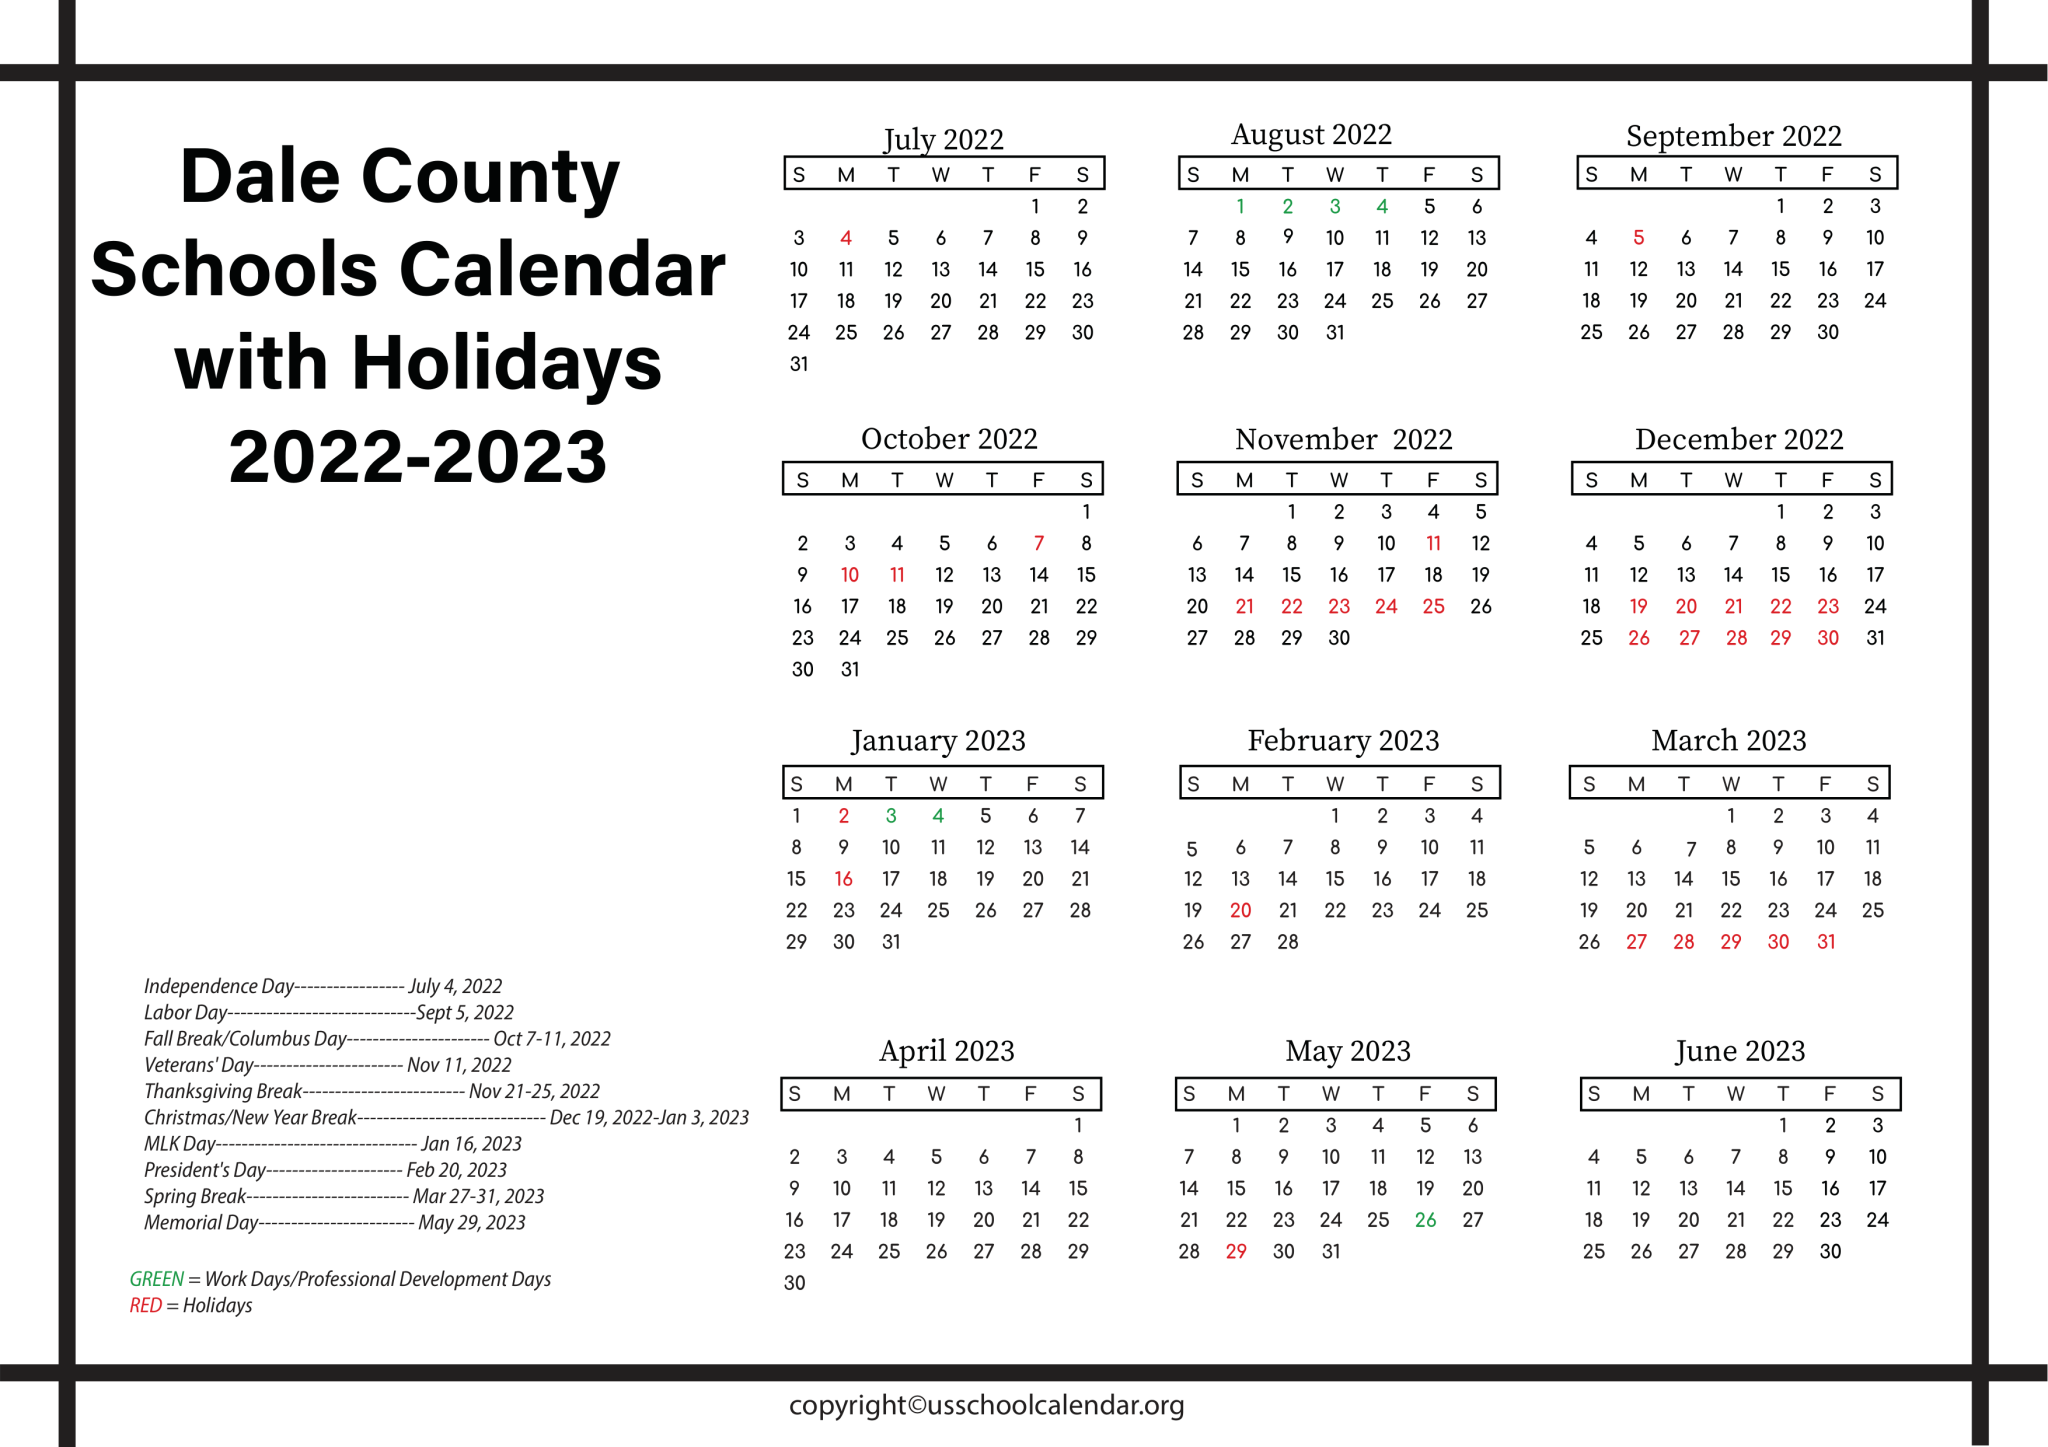 Dale County Schools Calendar with Holidays 2023